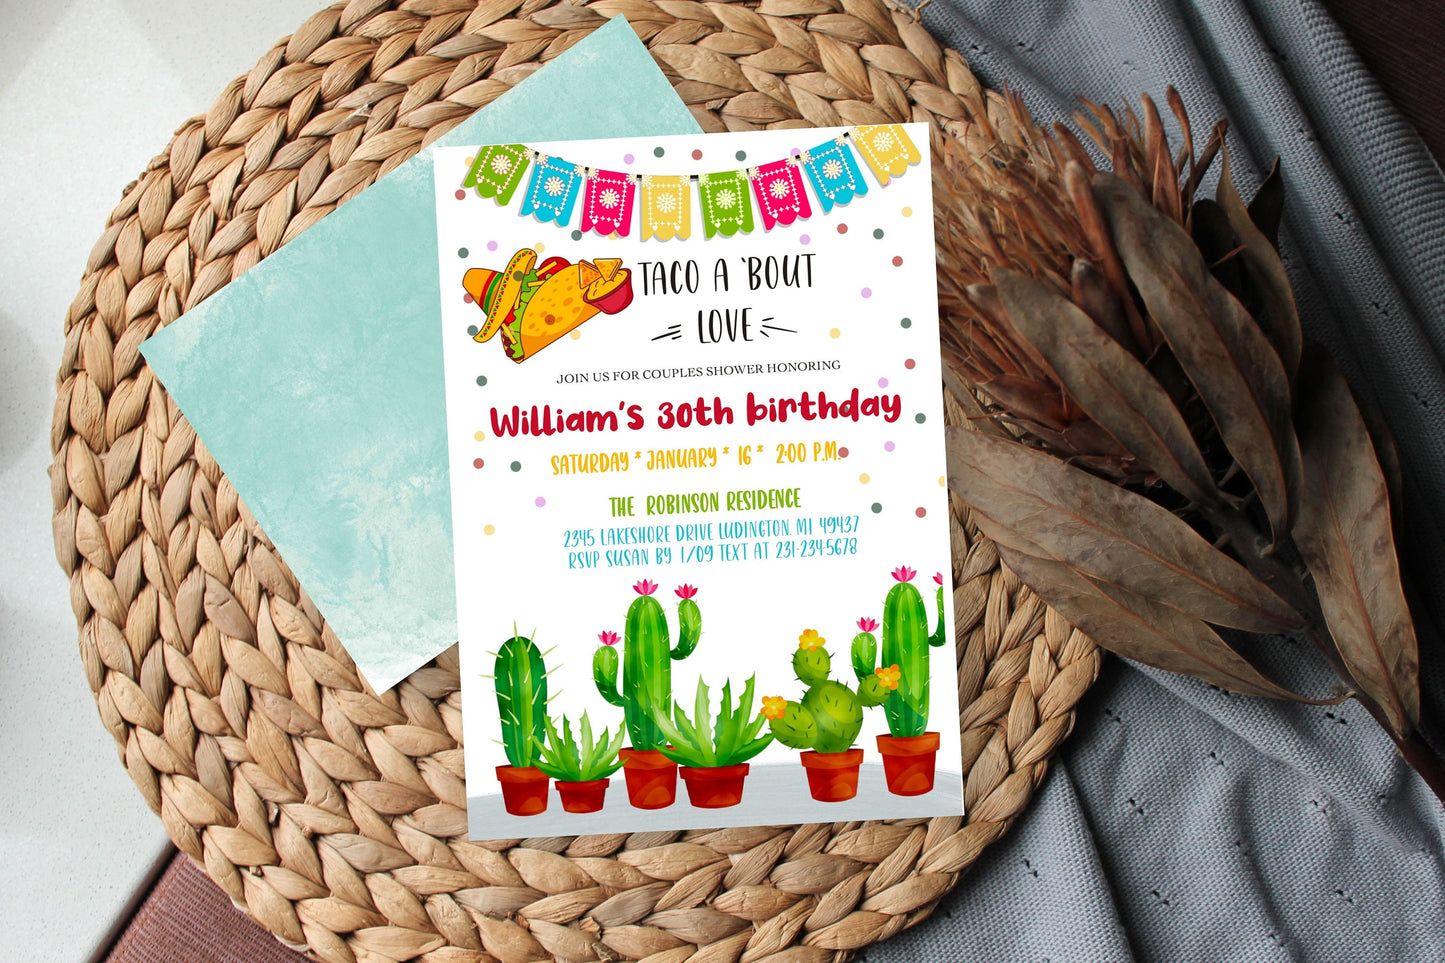 Any Age Taco Bout a Party Invitation - Fiesta Birthday Party Invite Cactus Invite - Chalkboard Digital INSTANT download Editable Fiesta,  GM